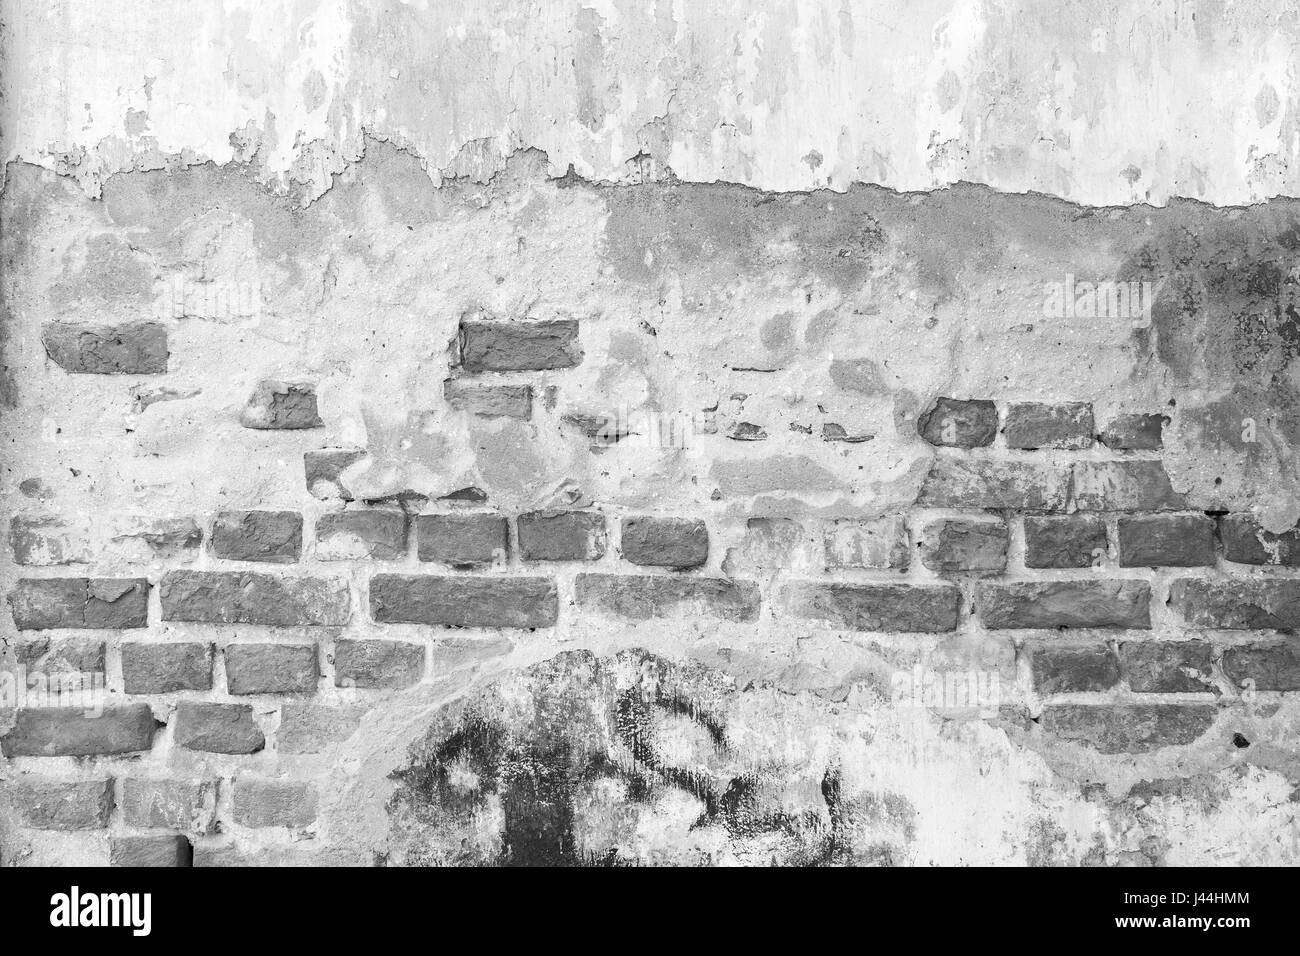 Broken, old and plastered wall revealing old brick wall in black&white. Stock Photo